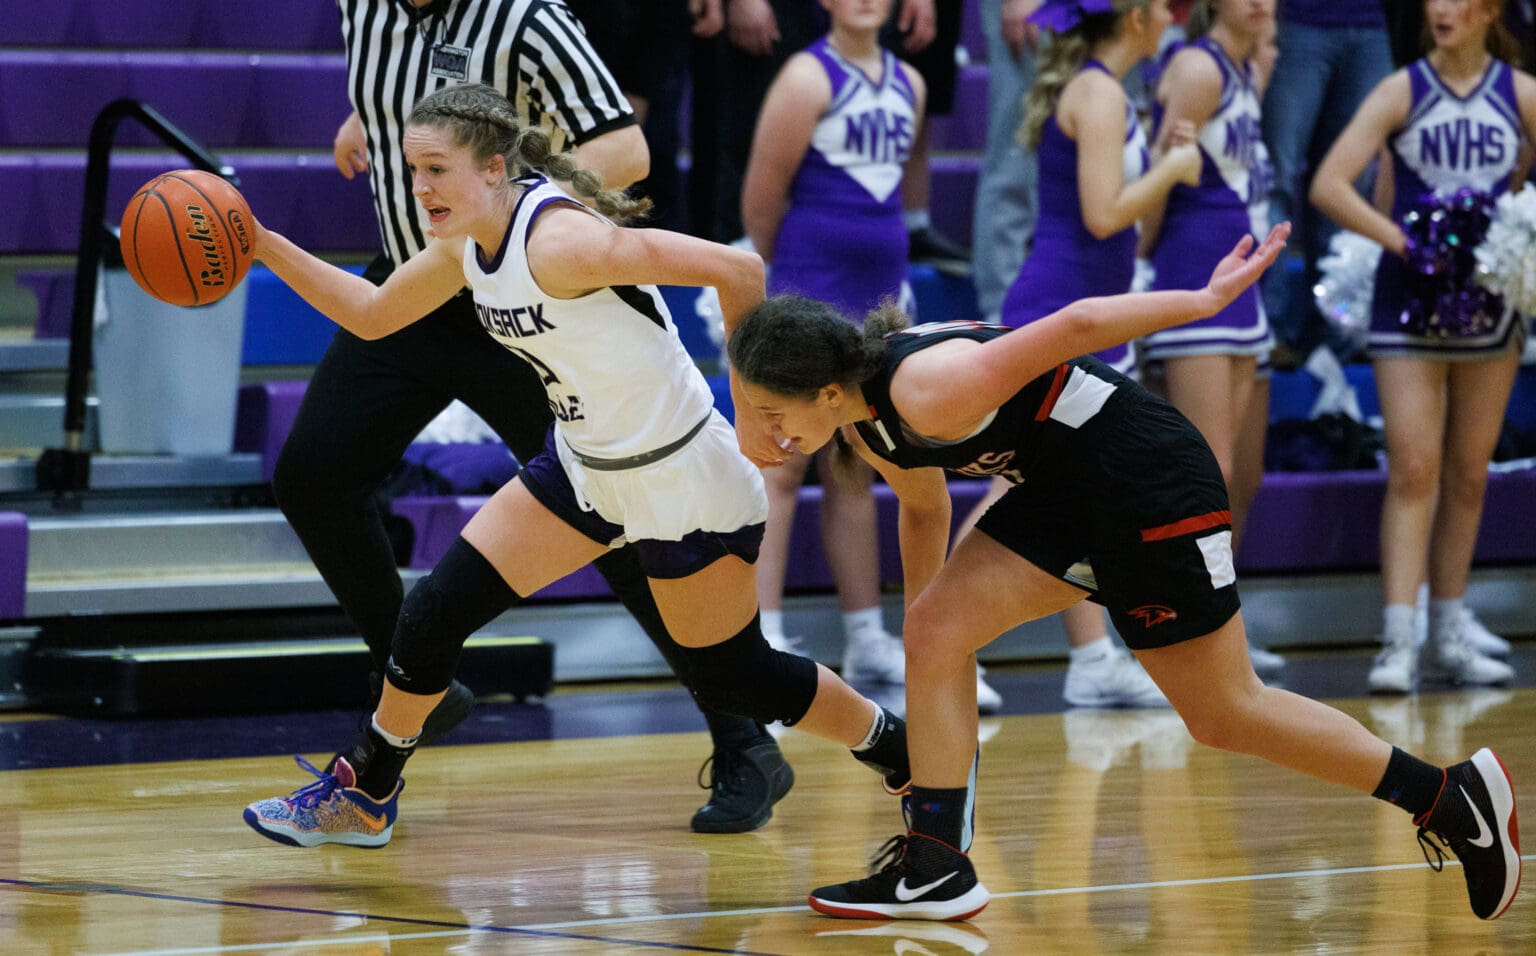 Nooksack Valley’s Lainey Kimball steals the ball and heads for the basket Dec. 10